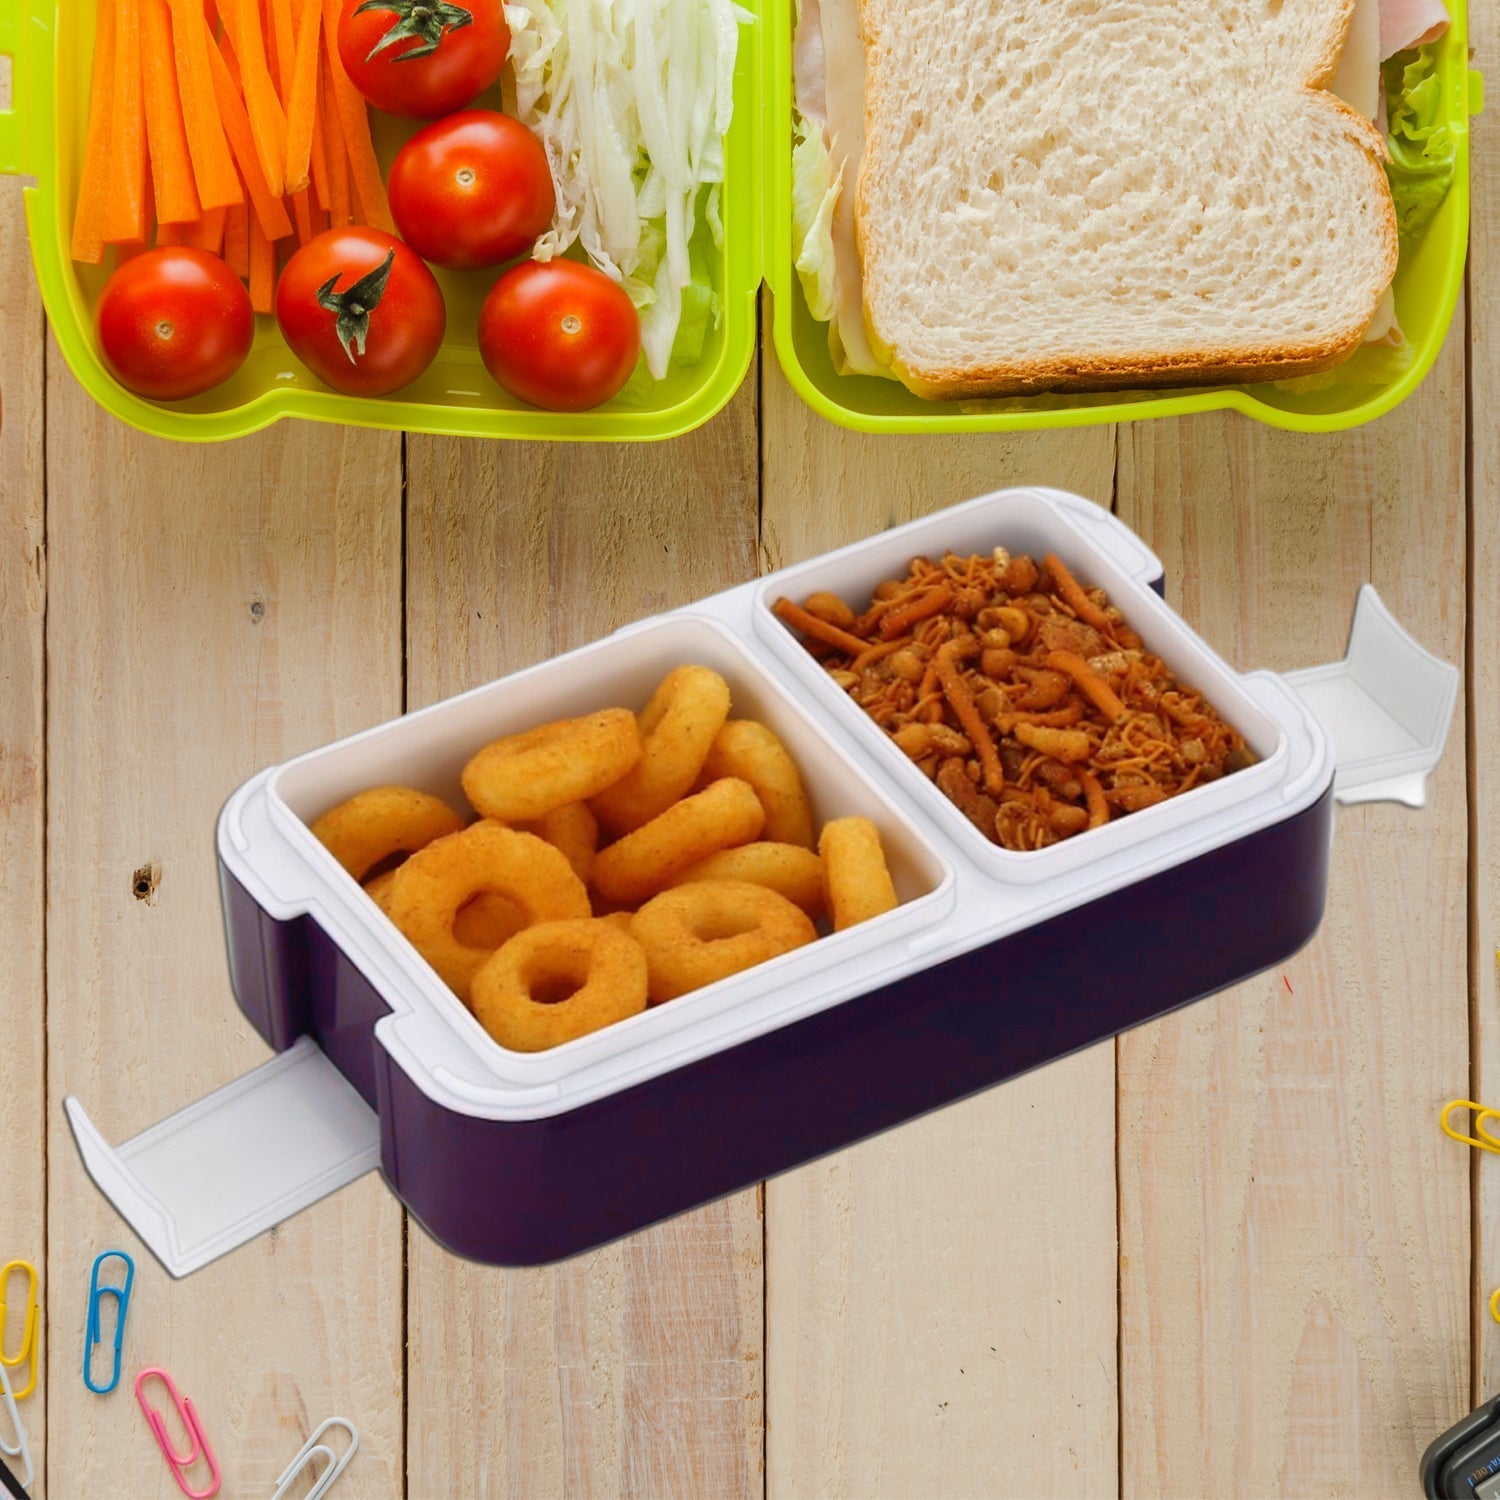 5332 AIRTIGHT LUNCH BOX 2 COMPARTMENT LUNCH BOX LEAK PROOF FOOD GRADE MATERIAL LUNCH BOX MODERN APPEARANCE & COMPACT LUNCH BOX WITH SPOON DeoDap